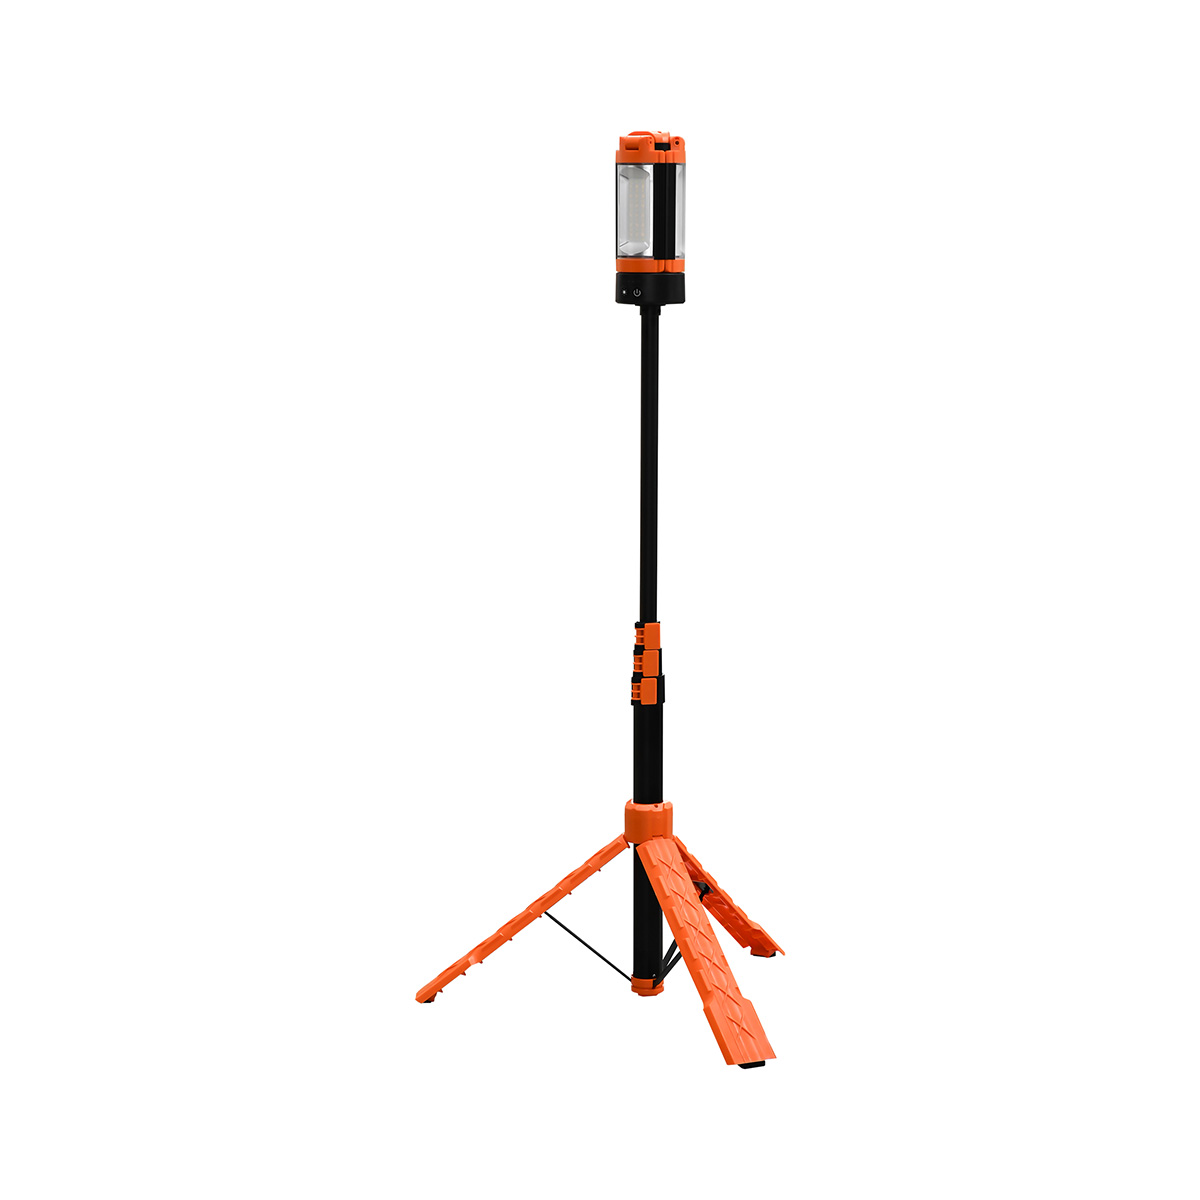 LM-W15438 Rechargeable Tripod Work Light